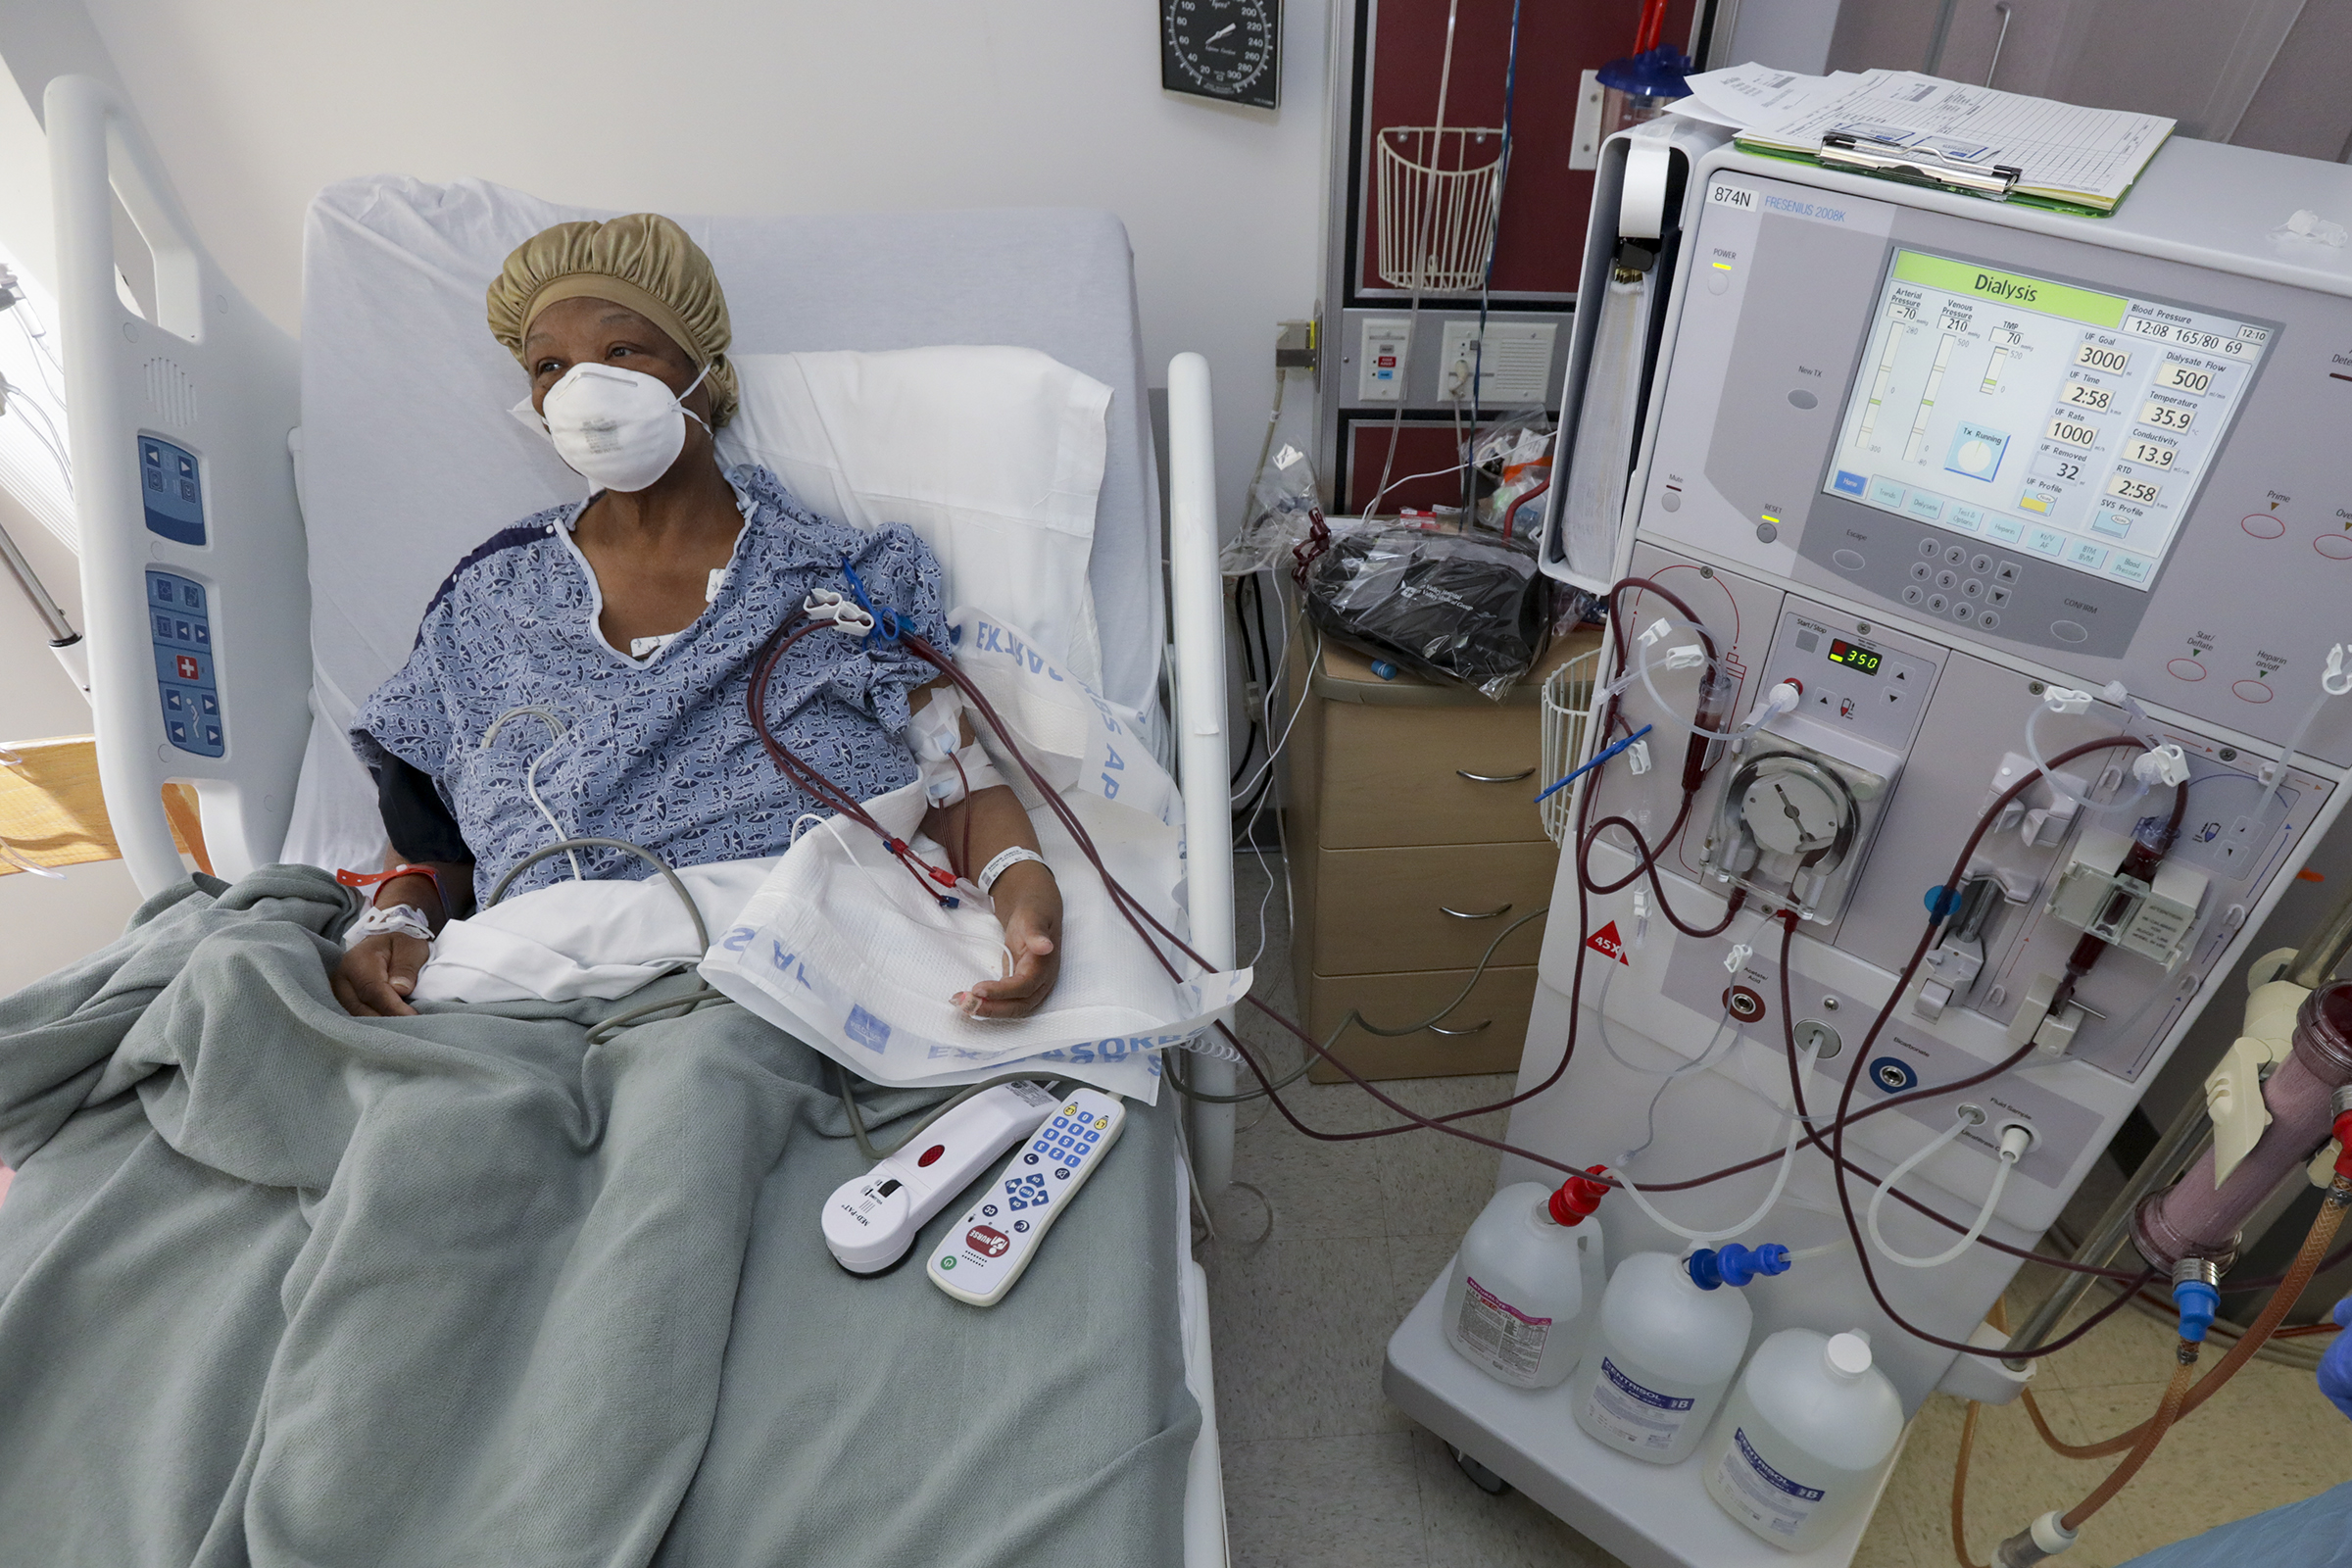 Dialysis is a miraculous technology, but compared to transplants, it’s awful.